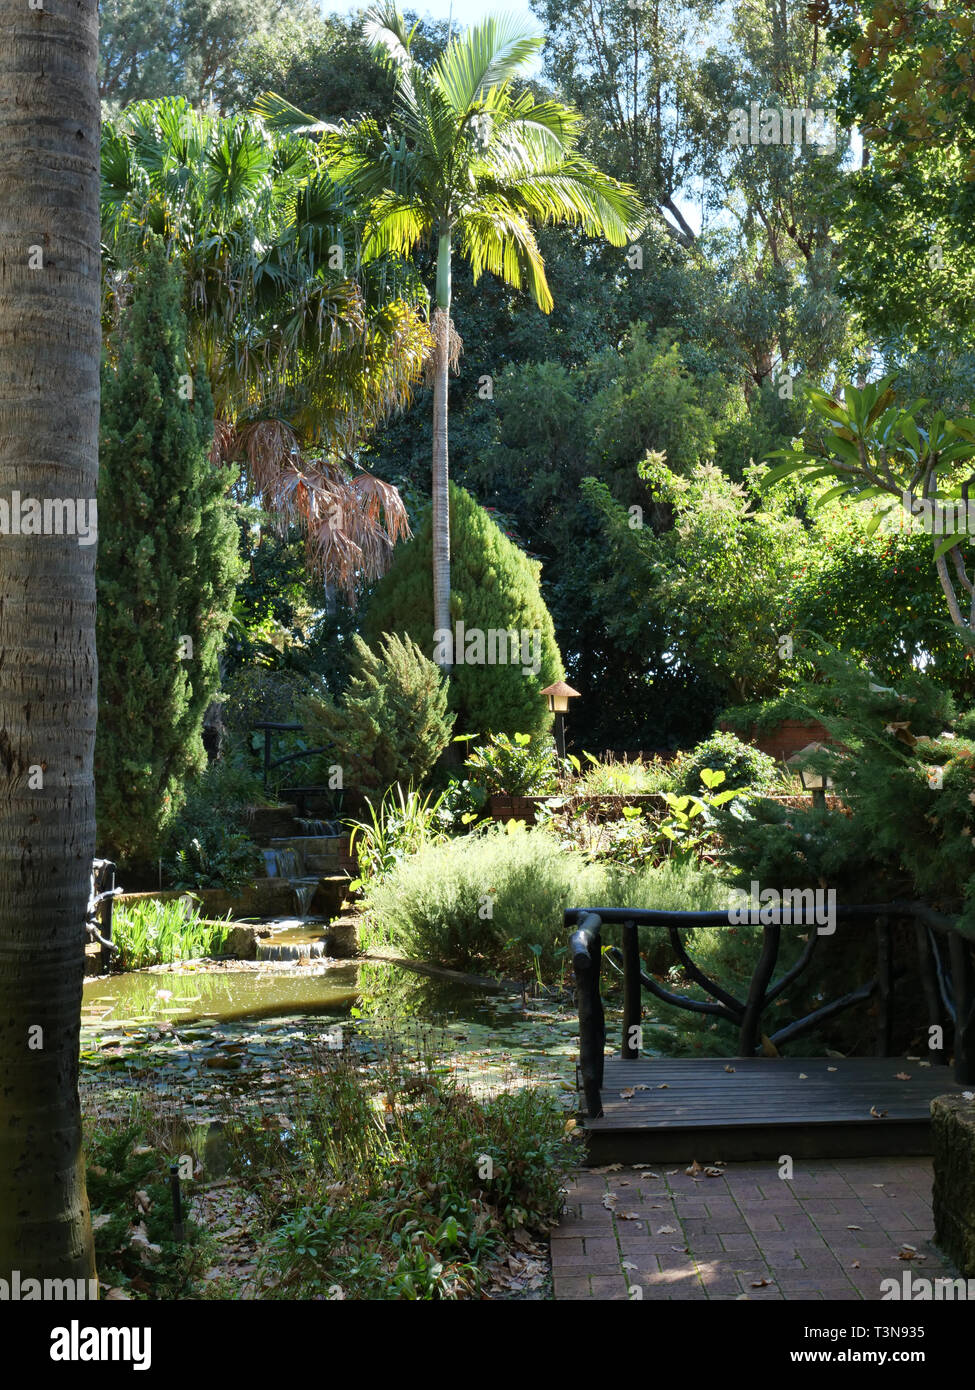 Wanneroo Botanical Garden has a mixture of native and imported garden  plants, a mini golf circuit and is located about 30 minutes north of Perth  WA Stock Photo - Alamy